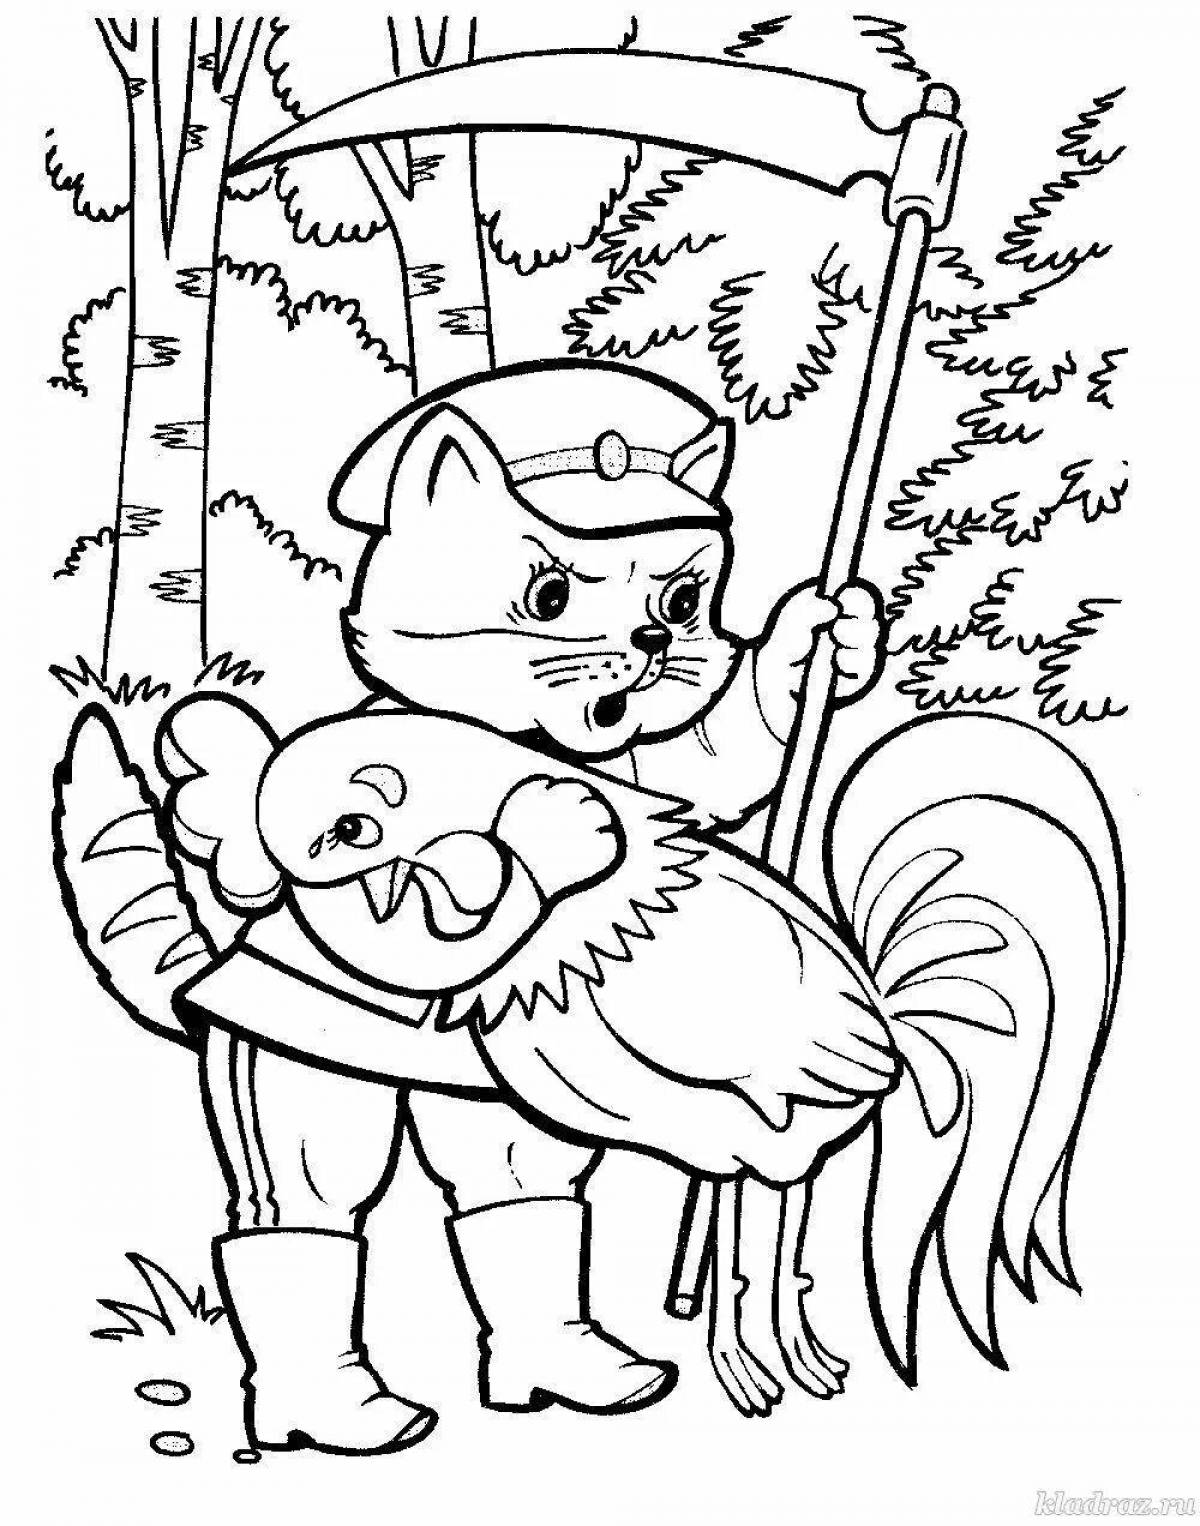 Amazing coloring book fox and rooster Russian folk tale